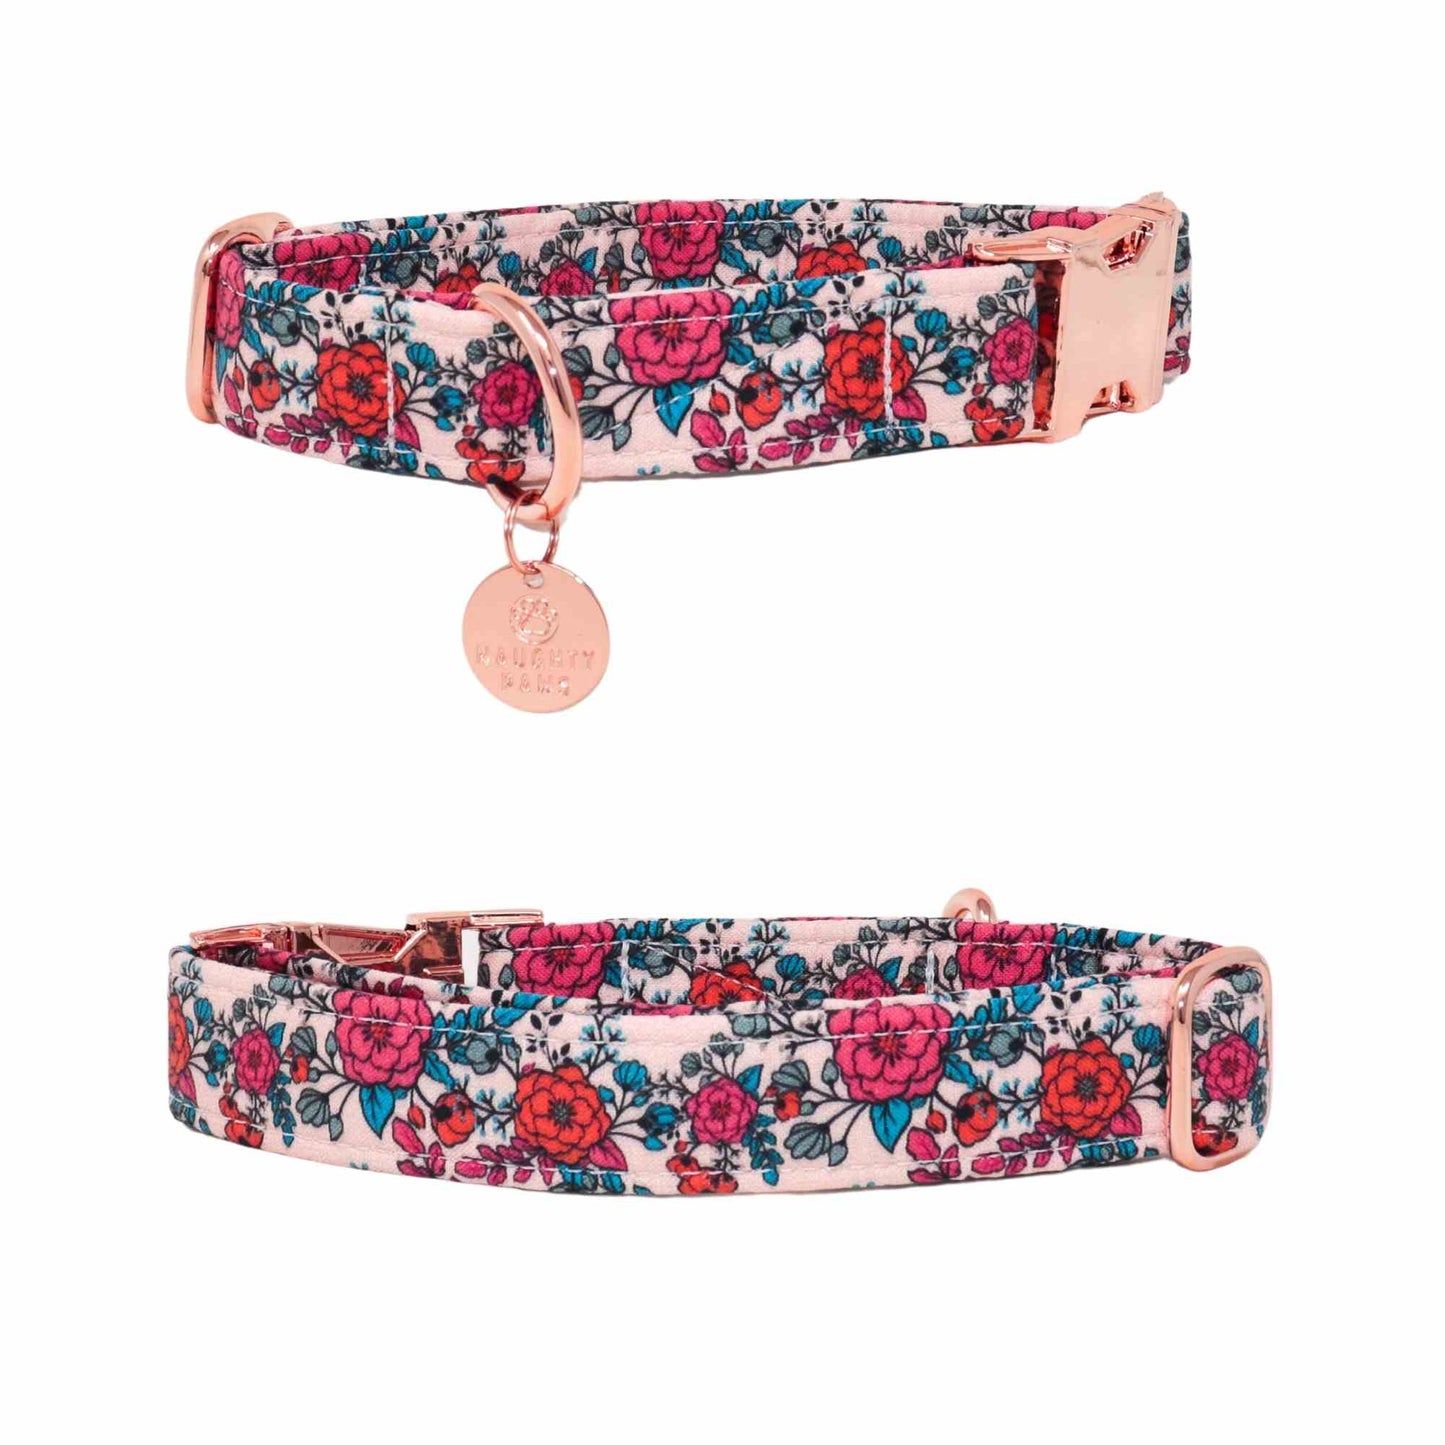 Handmade orange and hot pink floral summer dog collar - vibrant and stylish accessory for your furry friend to enjoy the sunny adventures together.